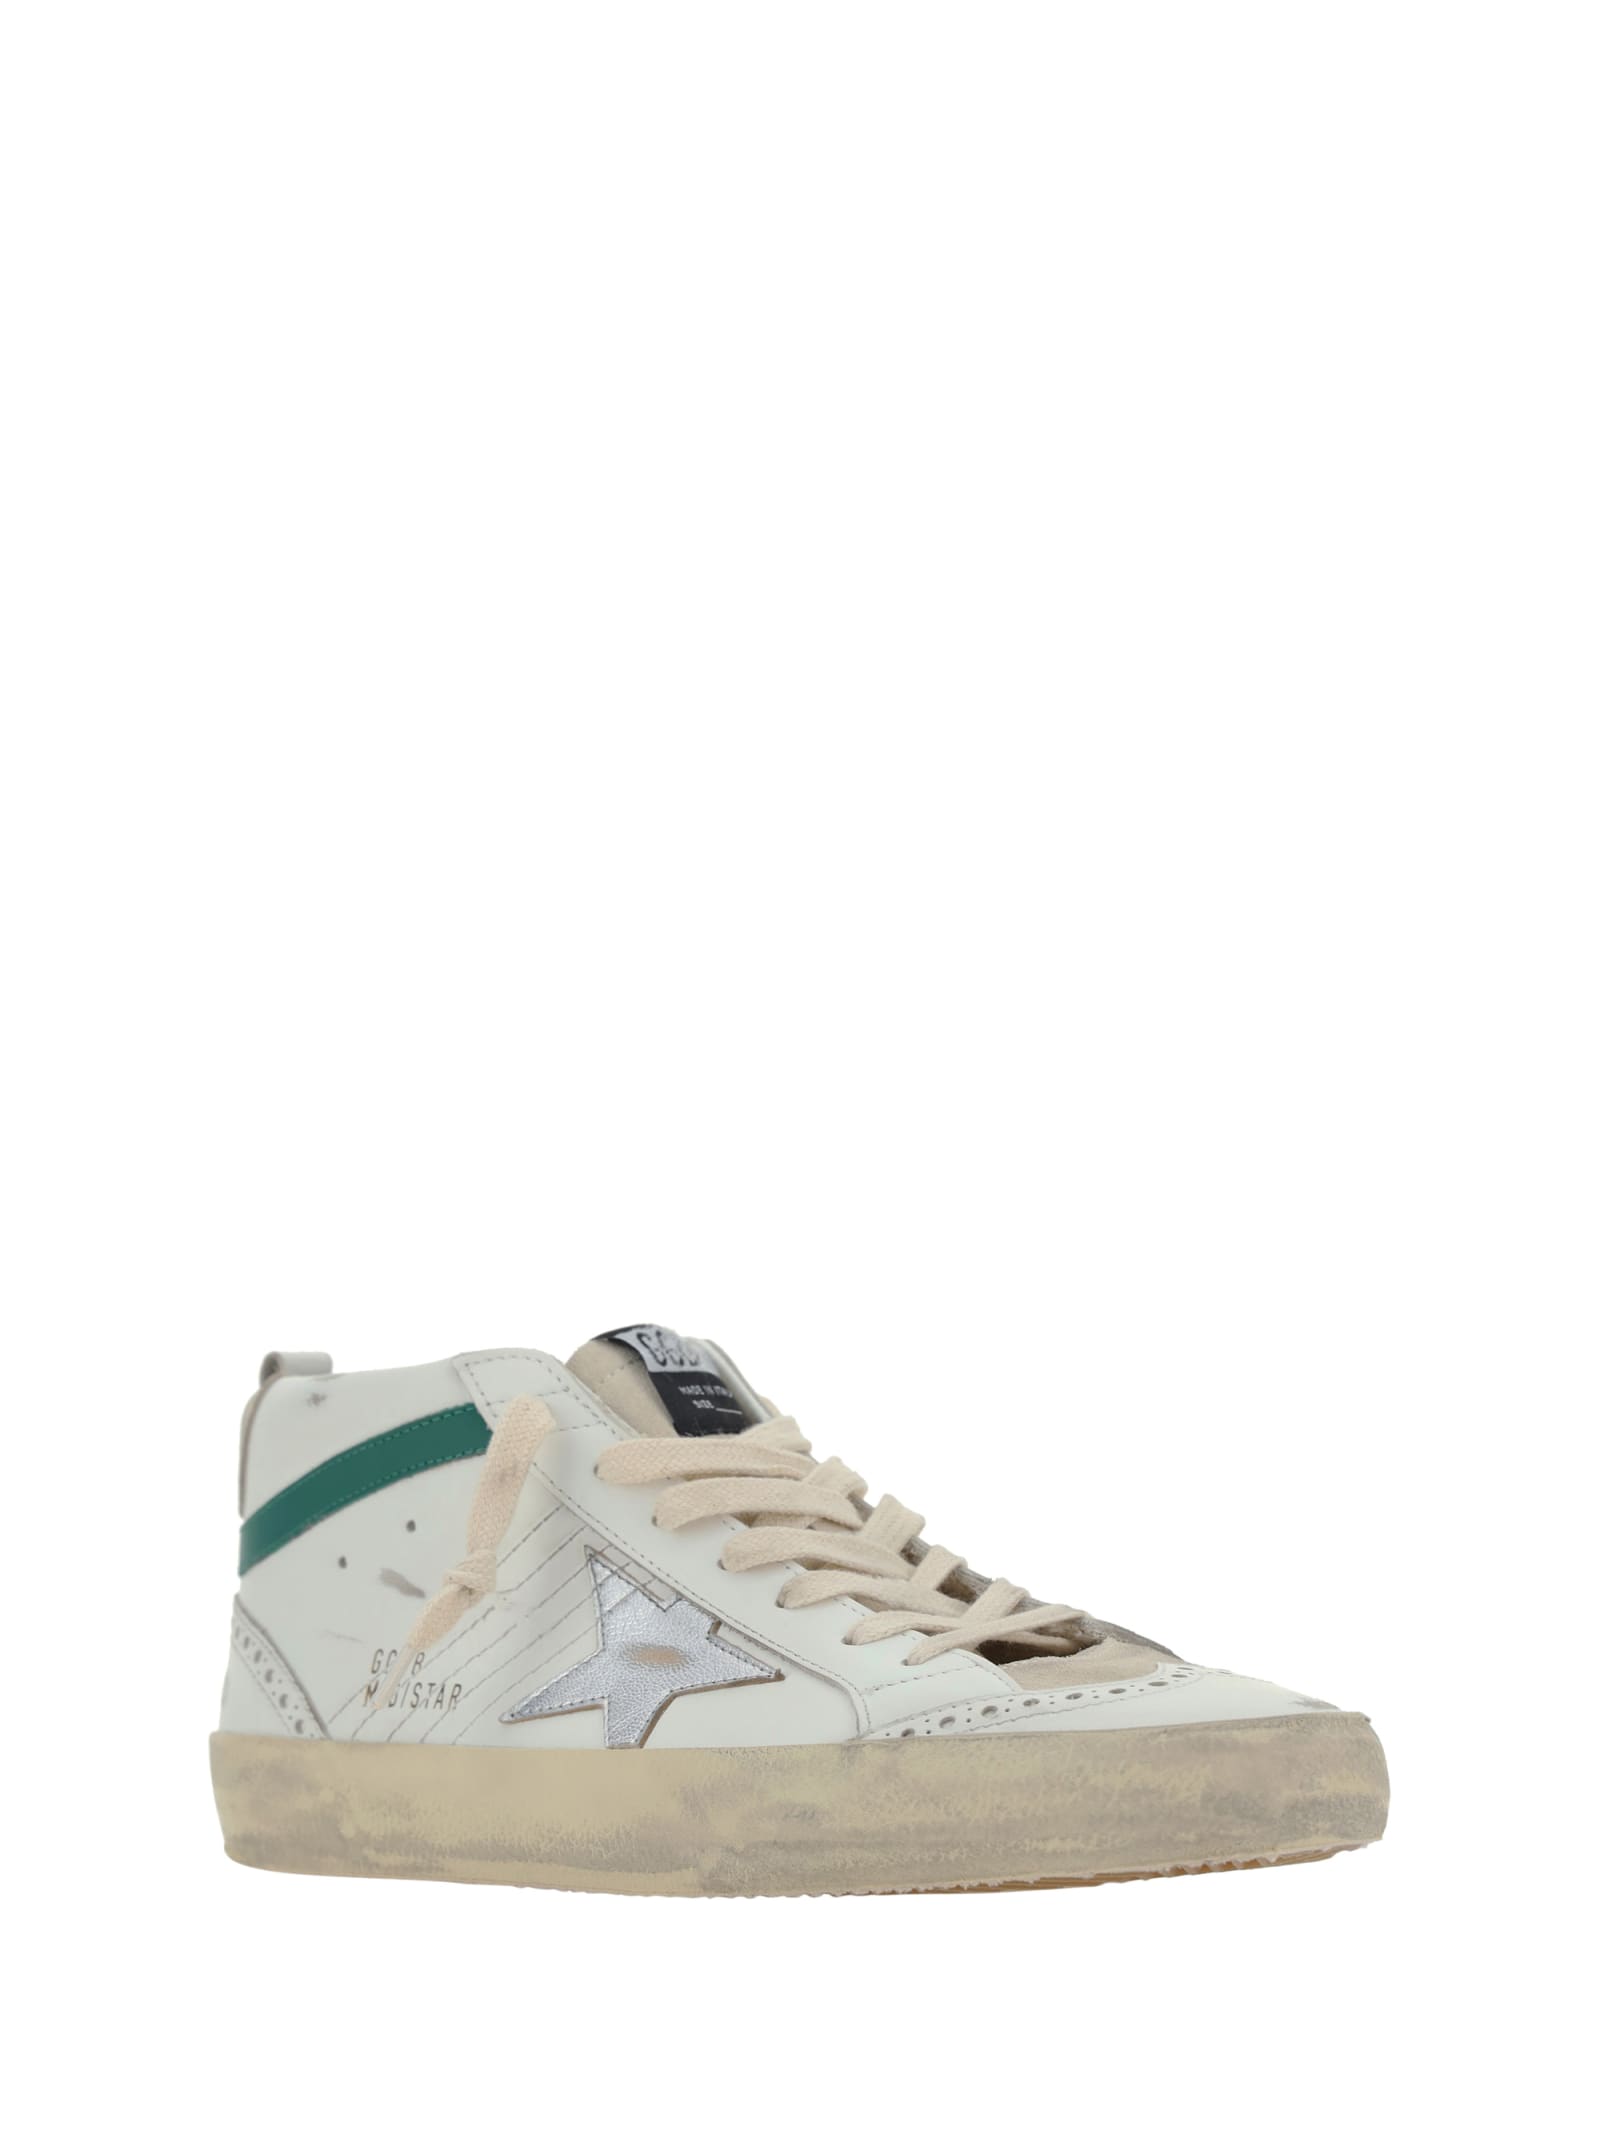 Shop Golden Goose Mid Star Sneakers In White/seedpearl/silver/green